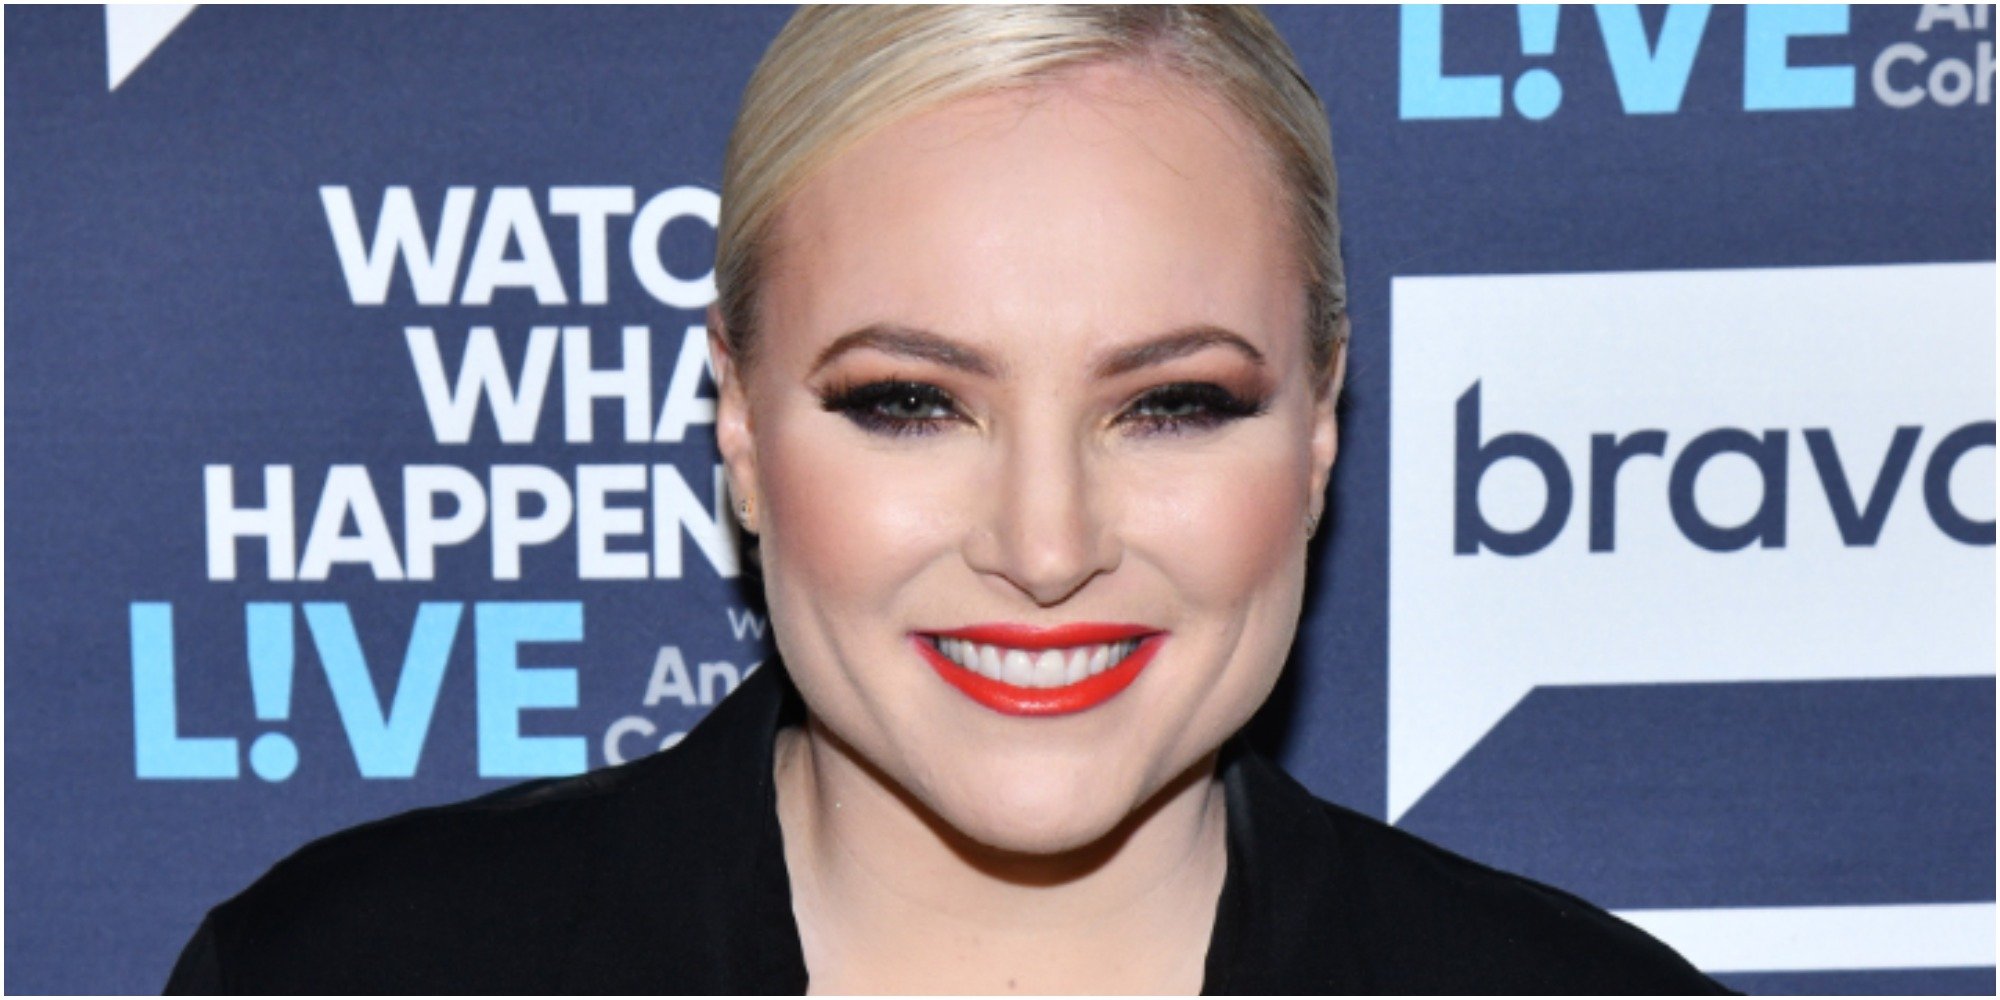 Meghan McCain poses outside "Watch What Happens Live."